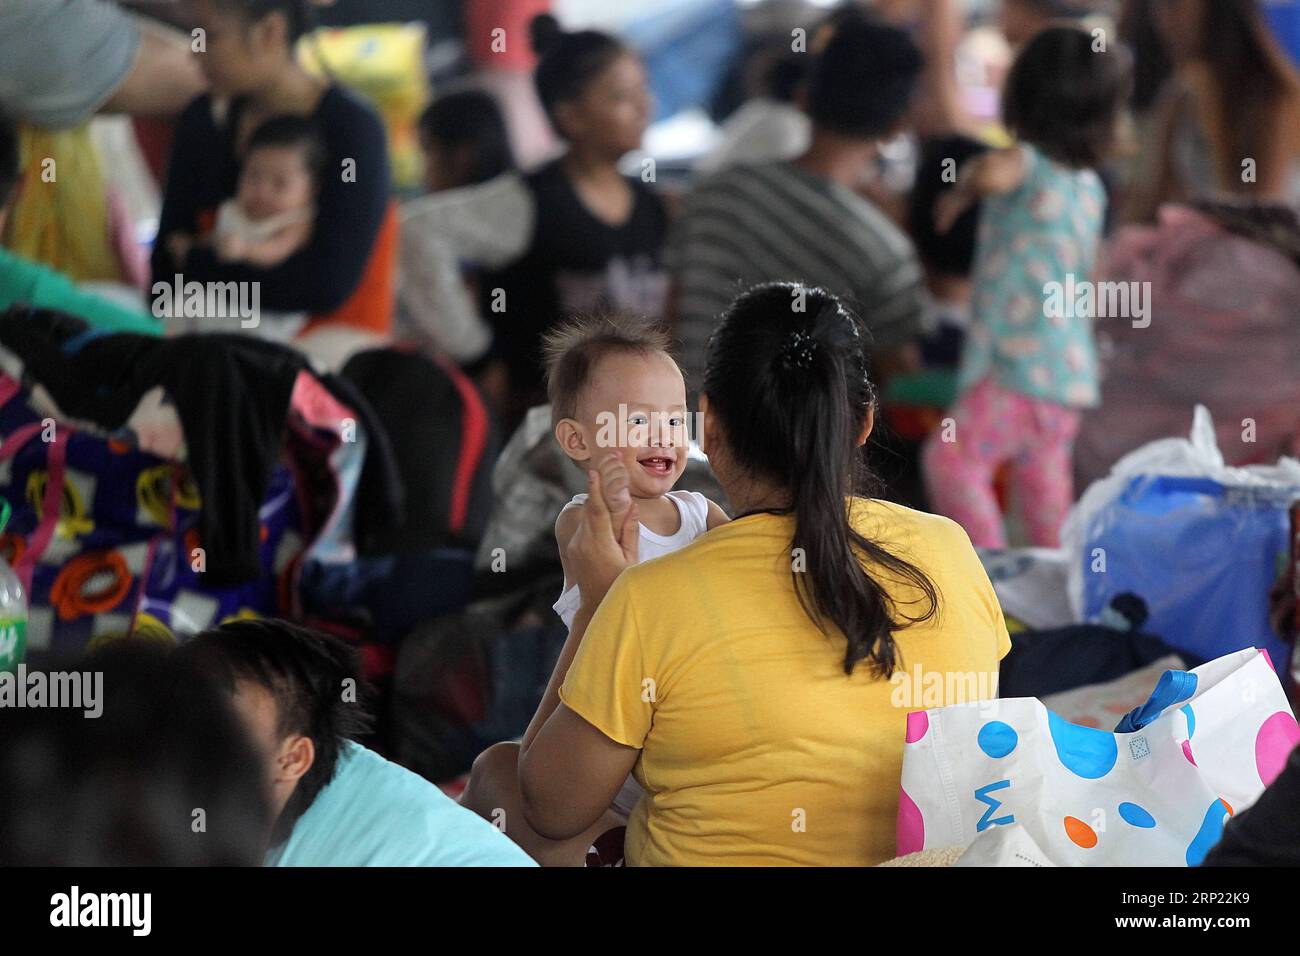 (180813) -- RIZAL, Aug. 13, 2018 -- A mother plays with her child in an evacuation center in Rizal Province, the Philippines, Aug. 13, 2018. Days of torrents of rainfall and flooding battered a widespread area in the Philippines, displacing nearly 383,000 people, a disaster agency said on Sunday. ) (jmmn) PHILIPPINES-RIZAL-EVACUATION CENTER RouellexUmali PUBLICATIONxNOTxINxCHN Stock Photo